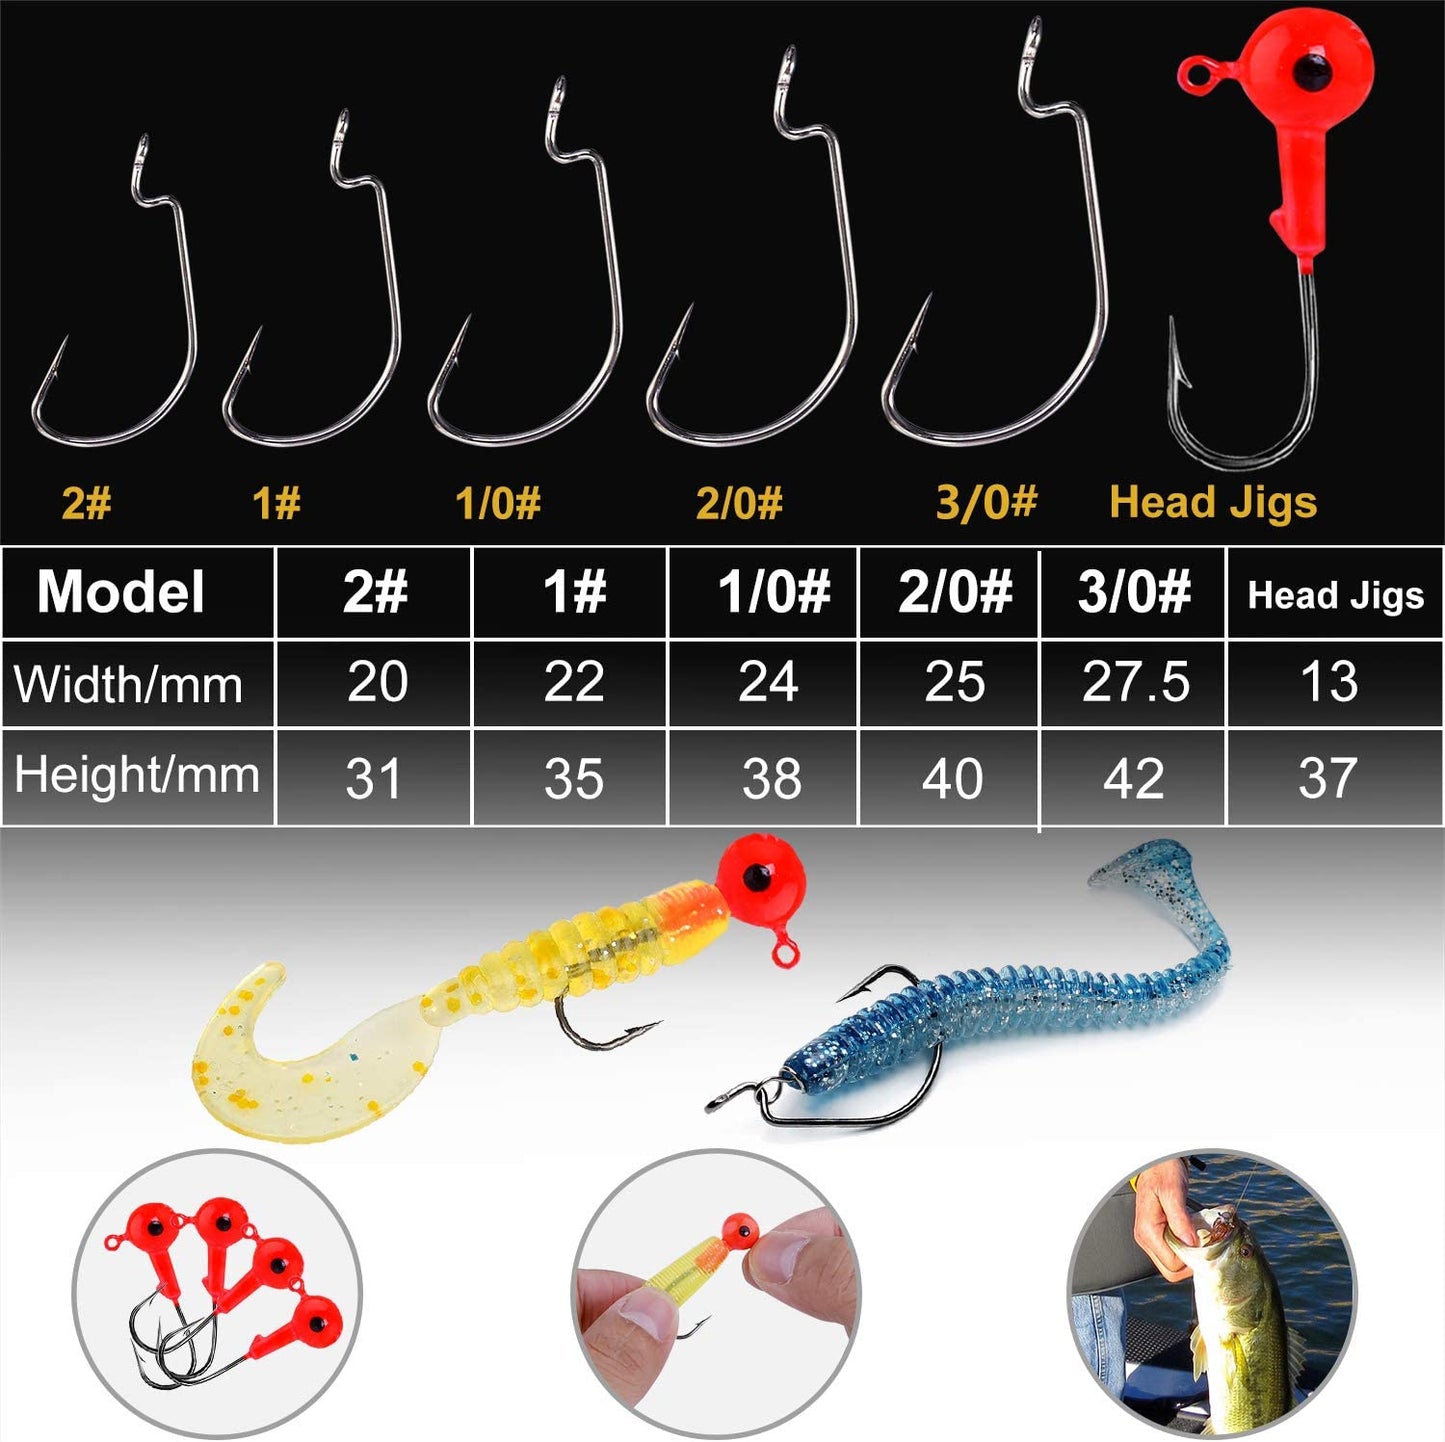 187/343Pcs Fishing Accessories Kit, Including Jig Hooks, Bullet Bass Casting Sinker Weights, Fishing Swivels Snaps, Sinker Slides, Fishing Set with Tackle Box